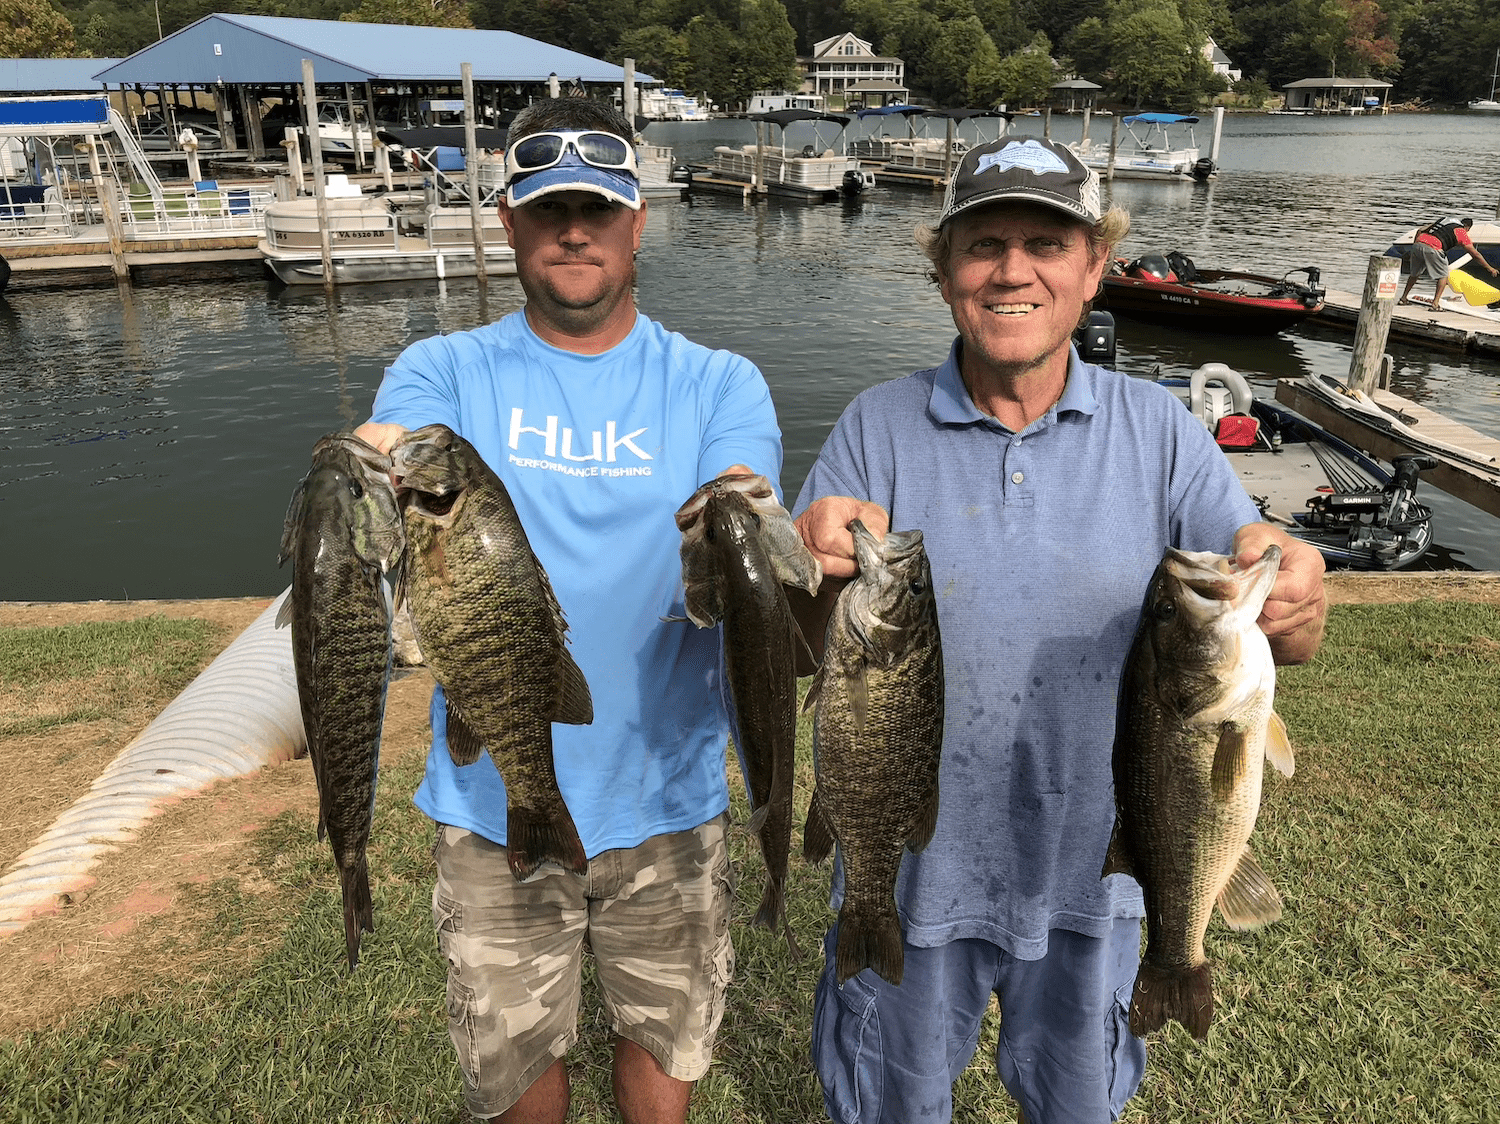 Ryan & Wayne Mace Win’s Fishing For Friends: Benefiting Male Breast Cancer Coalition Sep 28,2019 SML